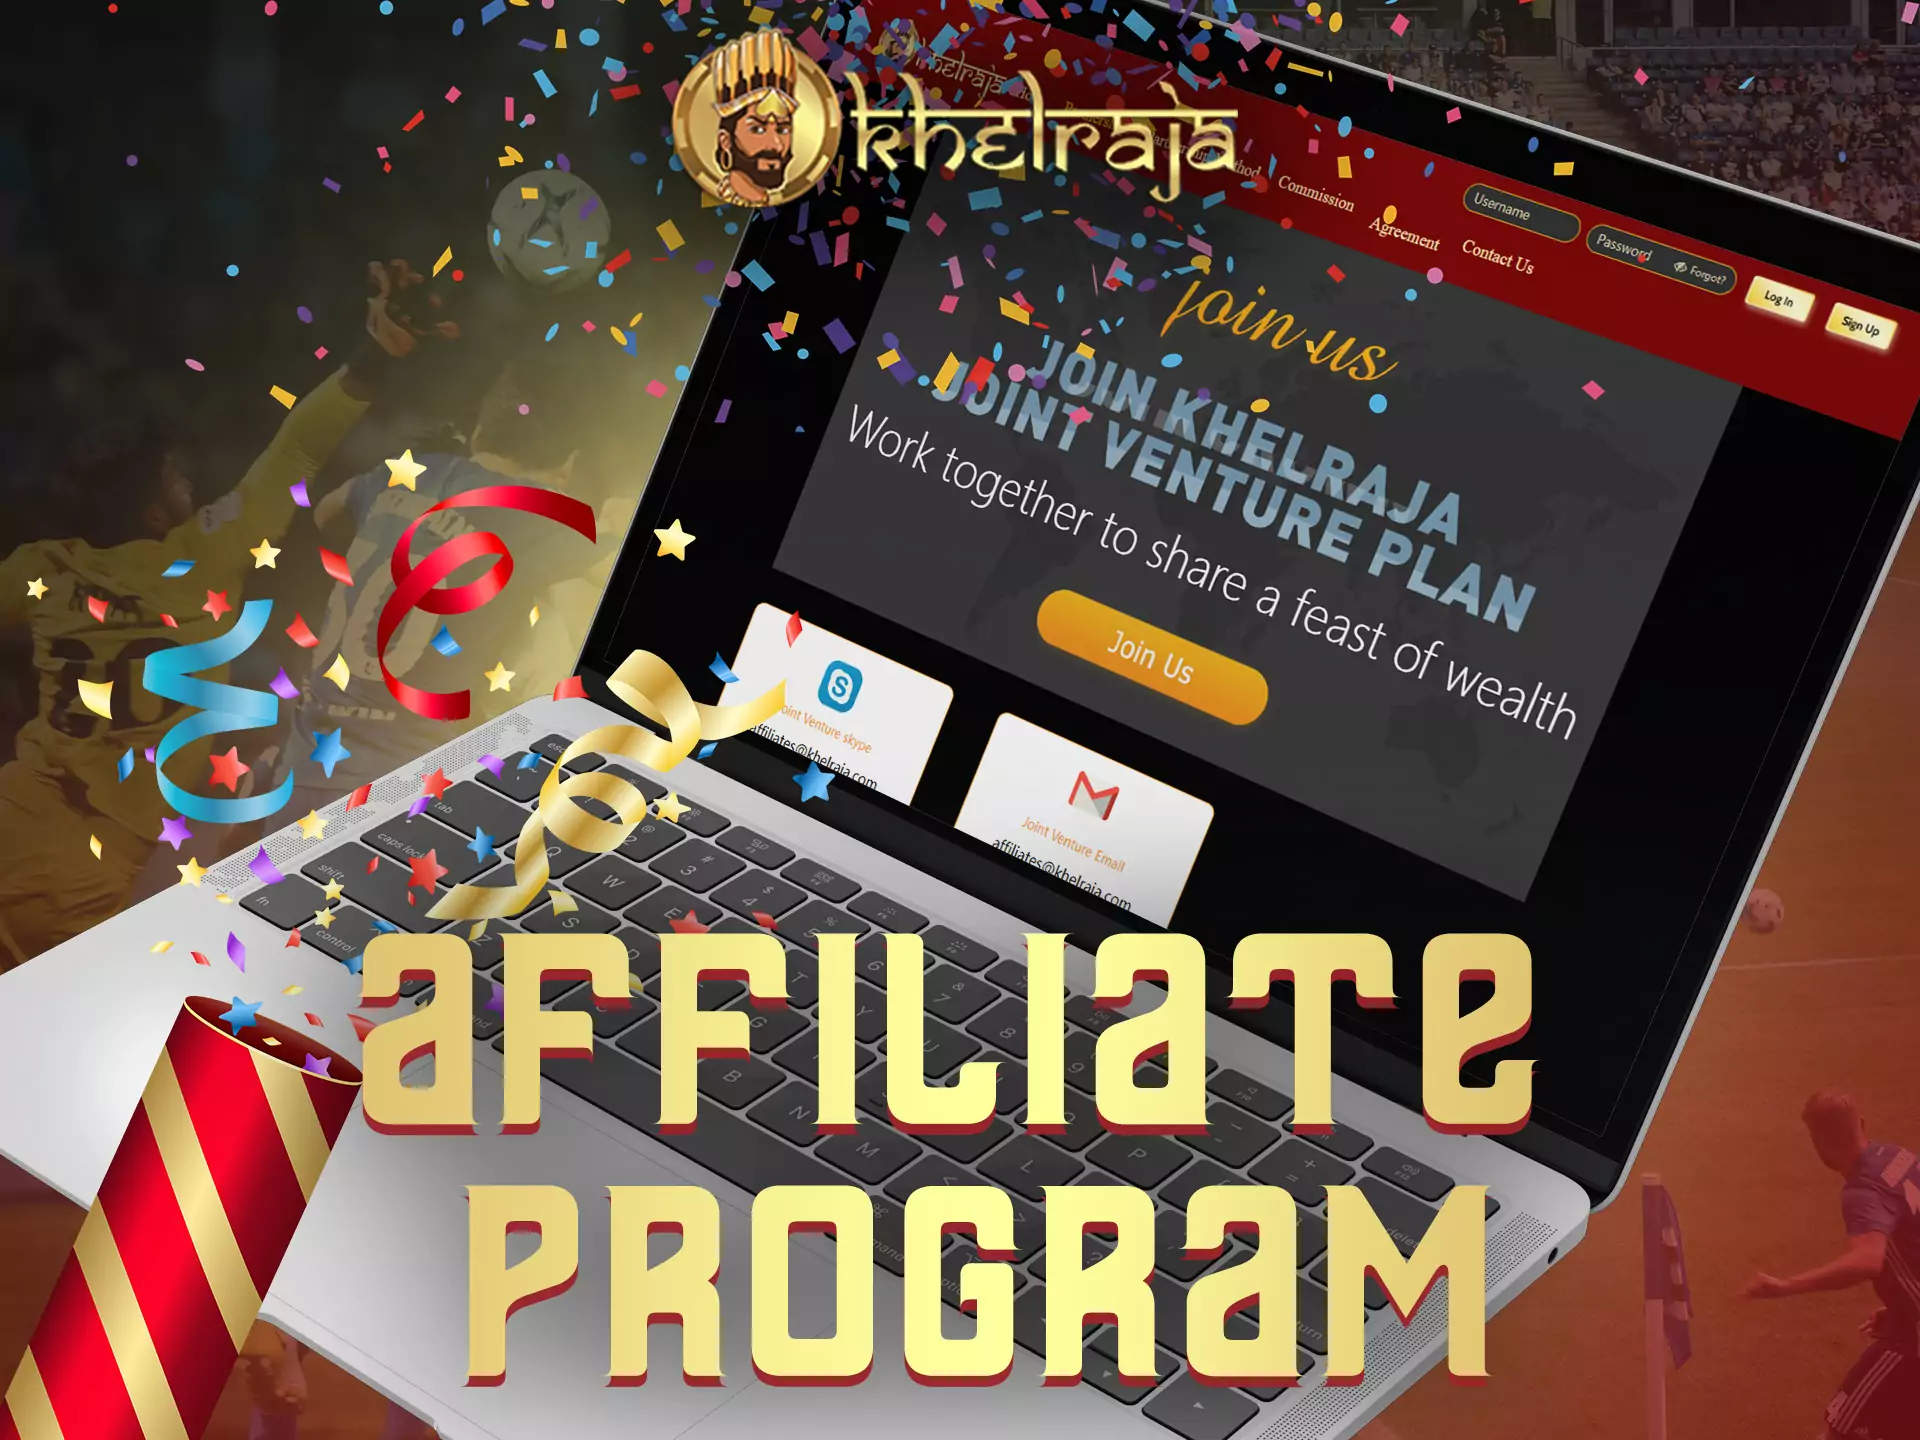 Khelraja has an affiliate program for registered users that allows for increasing profit.